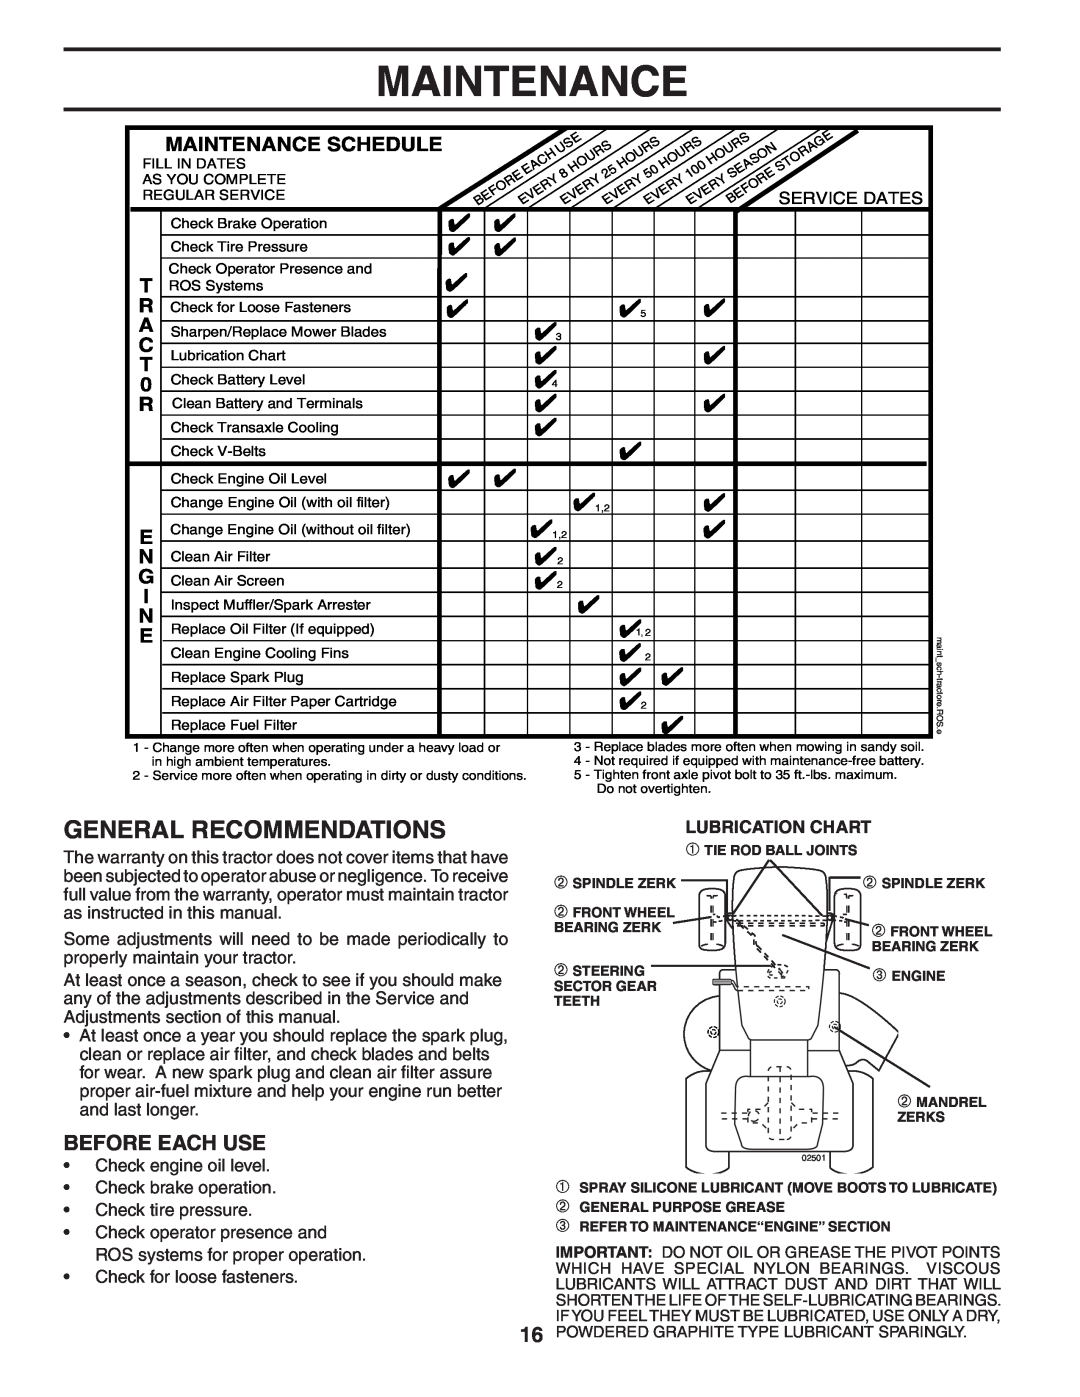 Poulan PBGT27H54 manual General Recommendations, Before Each Use, Maintenance Schedule 